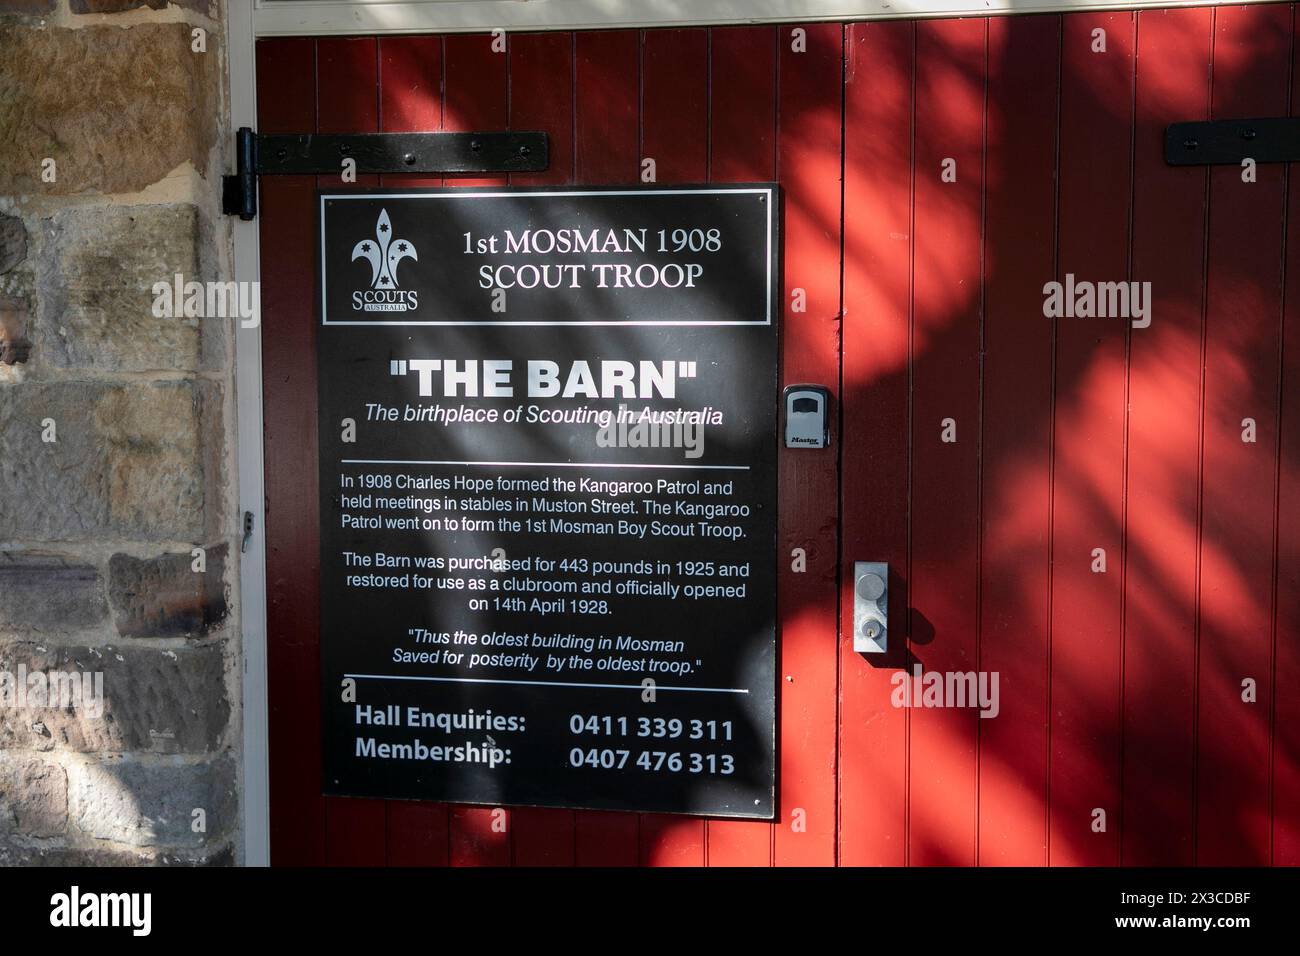 1st Mosman Scout Troop, birthplace of scouting in Australia, the barn is a heritage building built by Archibald Mosman in 1831, Sydney,NSW,Australia Stock Photo